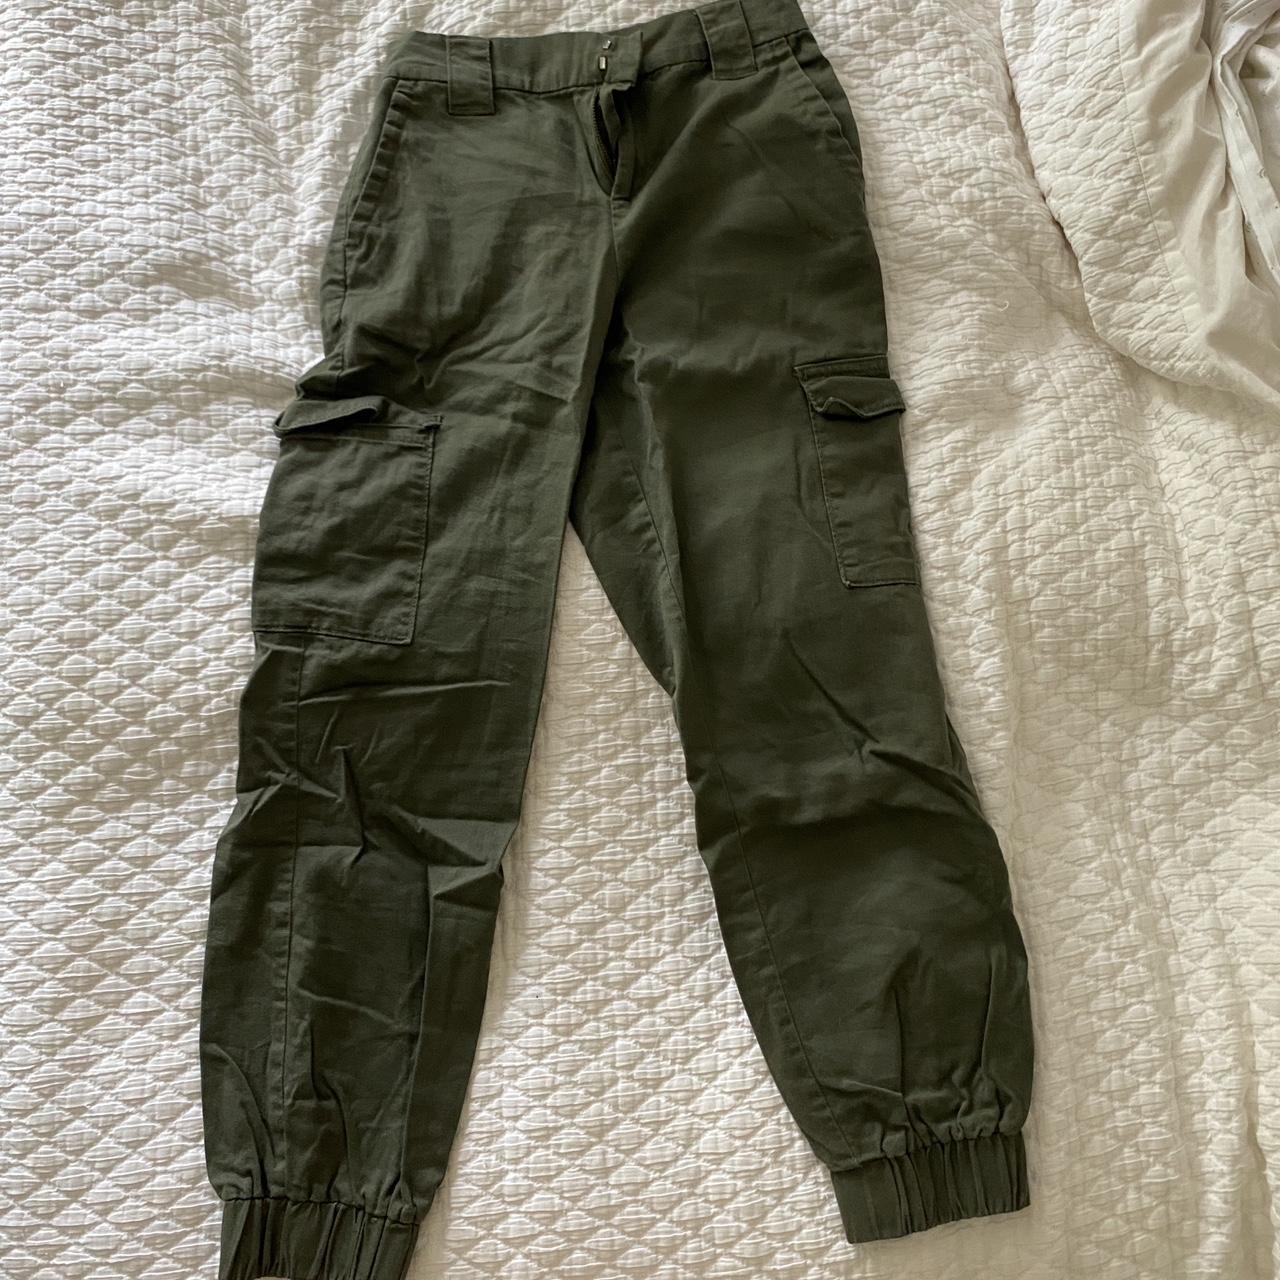 Vanilla Star Women's Cargo Pants In Army Green Color Size 7/28 | eBay